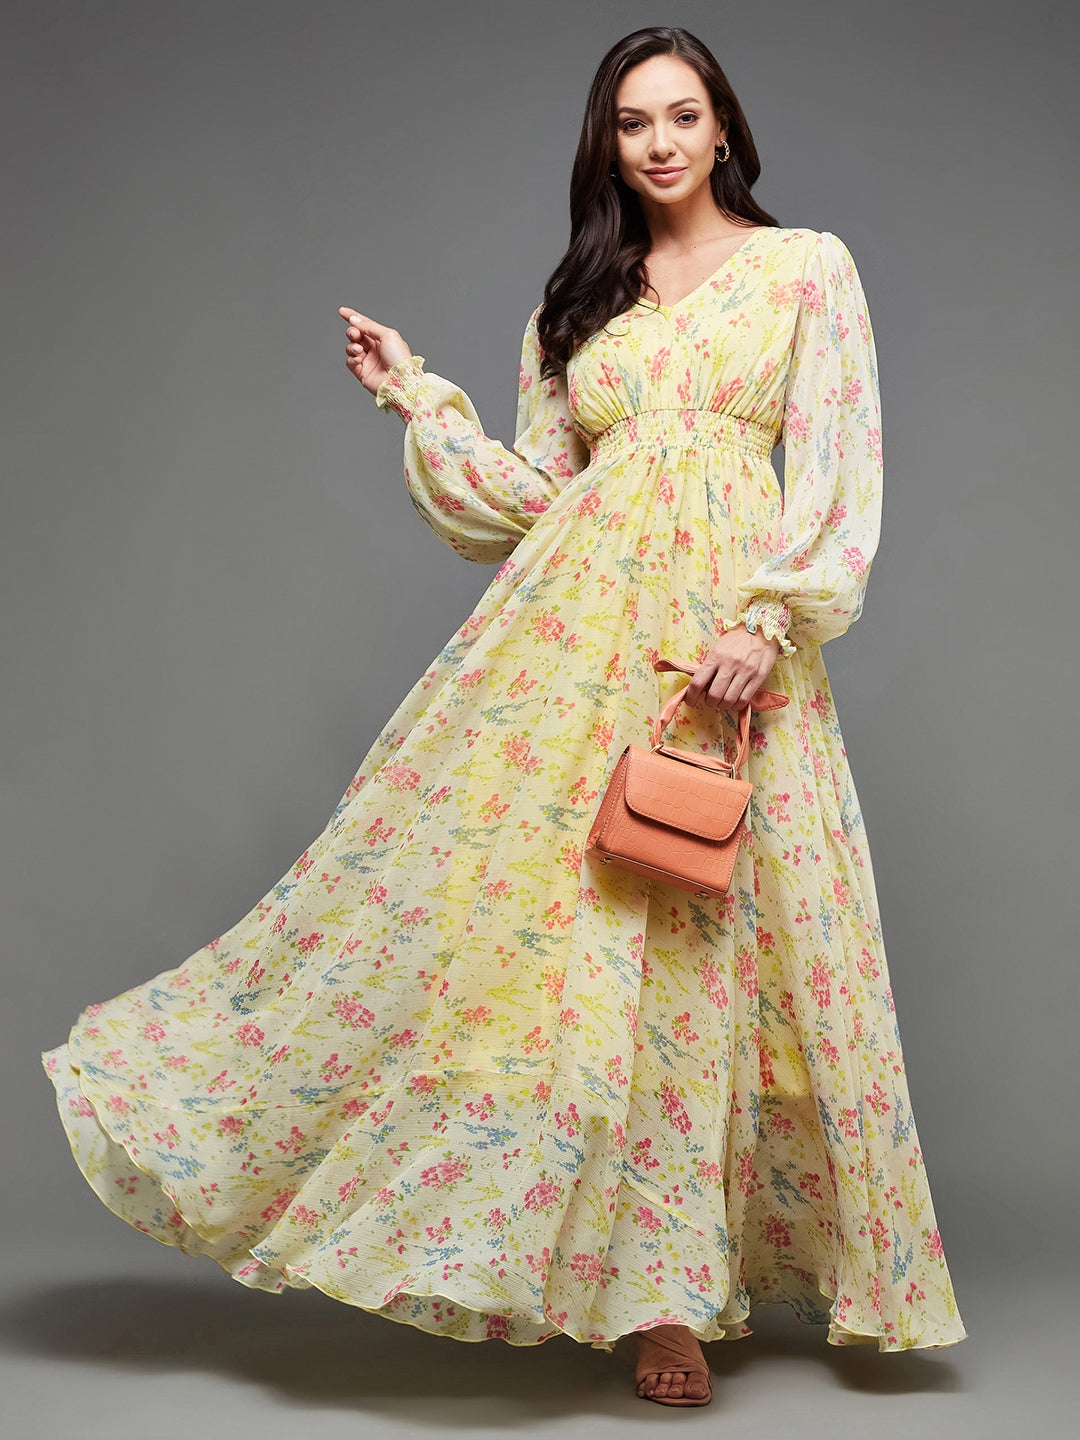 Multicolored-Base-Lime Yellow V-Neck Bishop Sleeve Floral Gathered Chiffon Maxi Dress